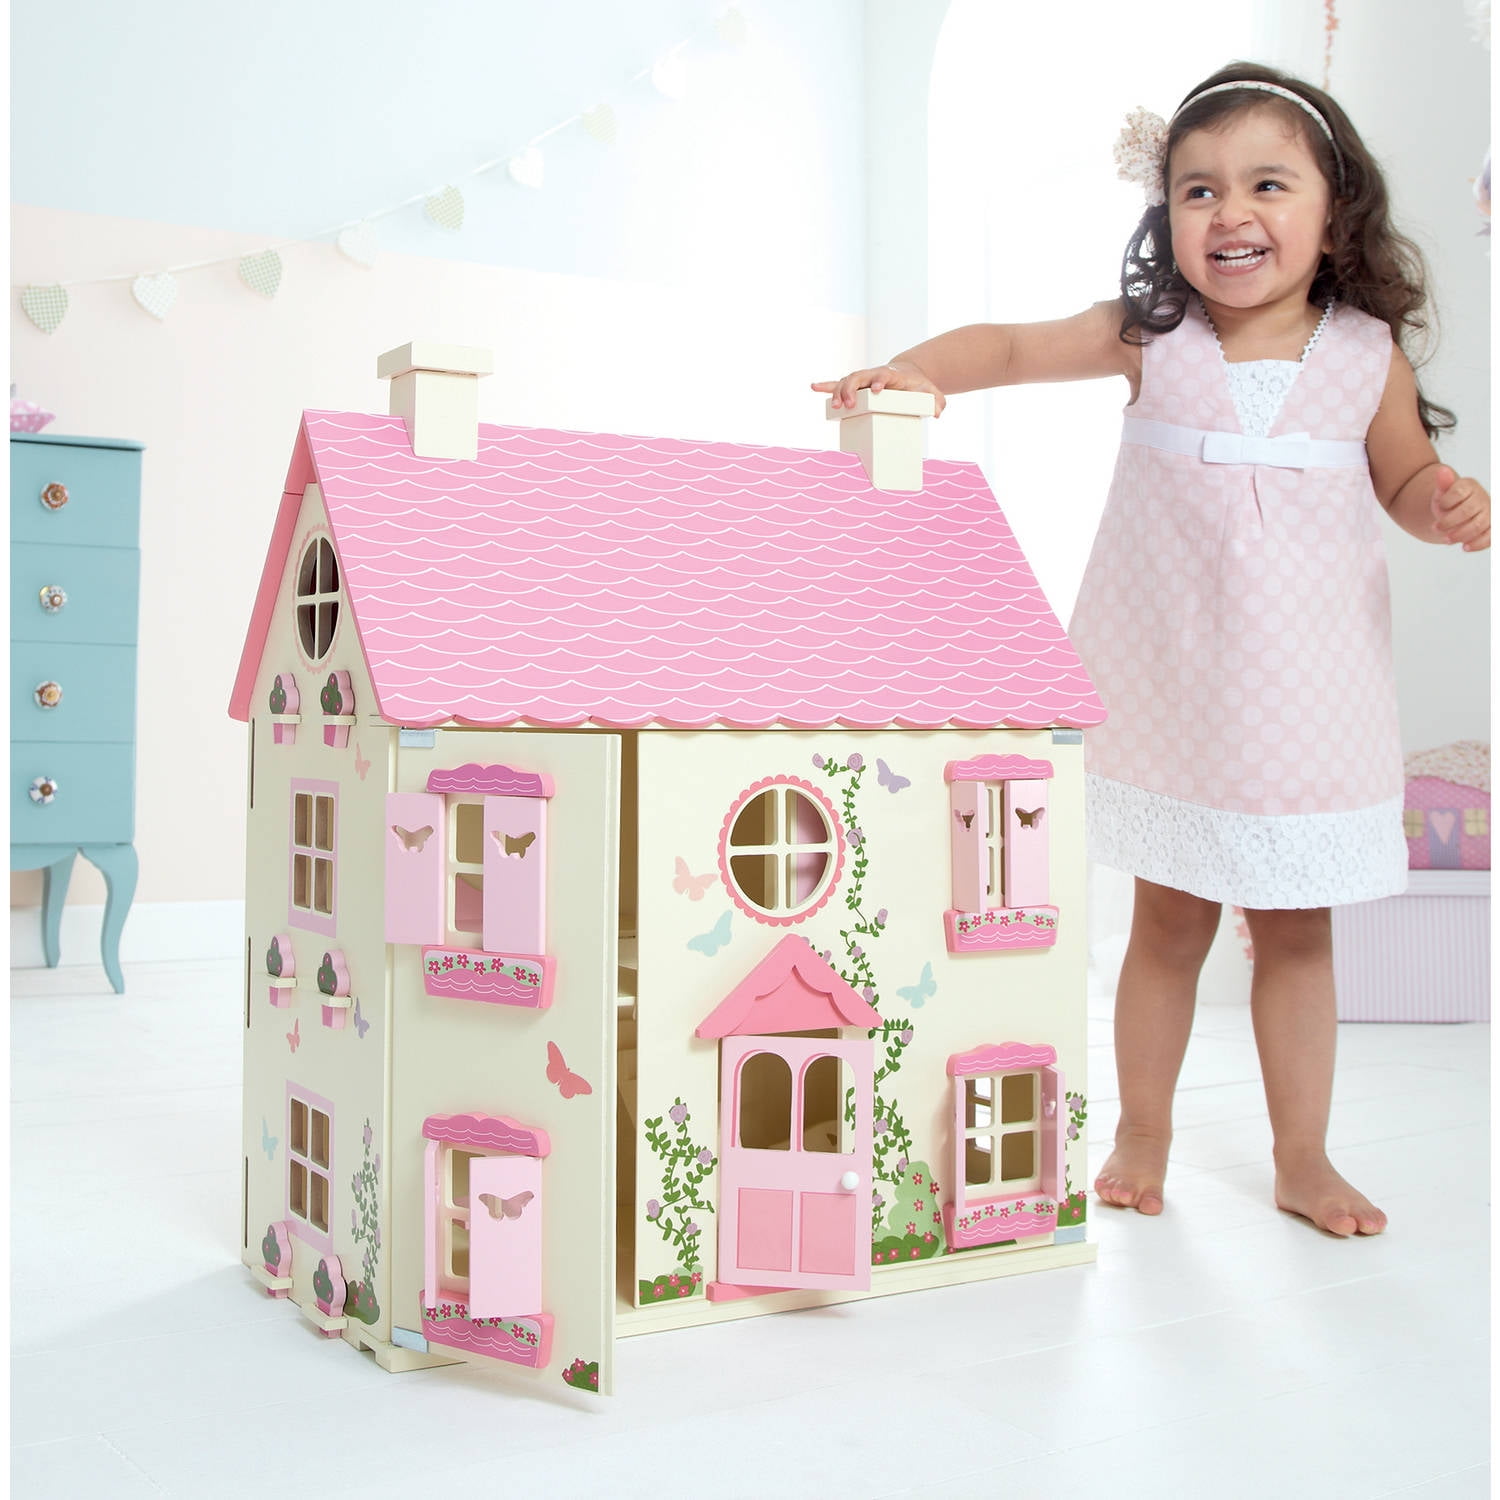 girly doll house decoration